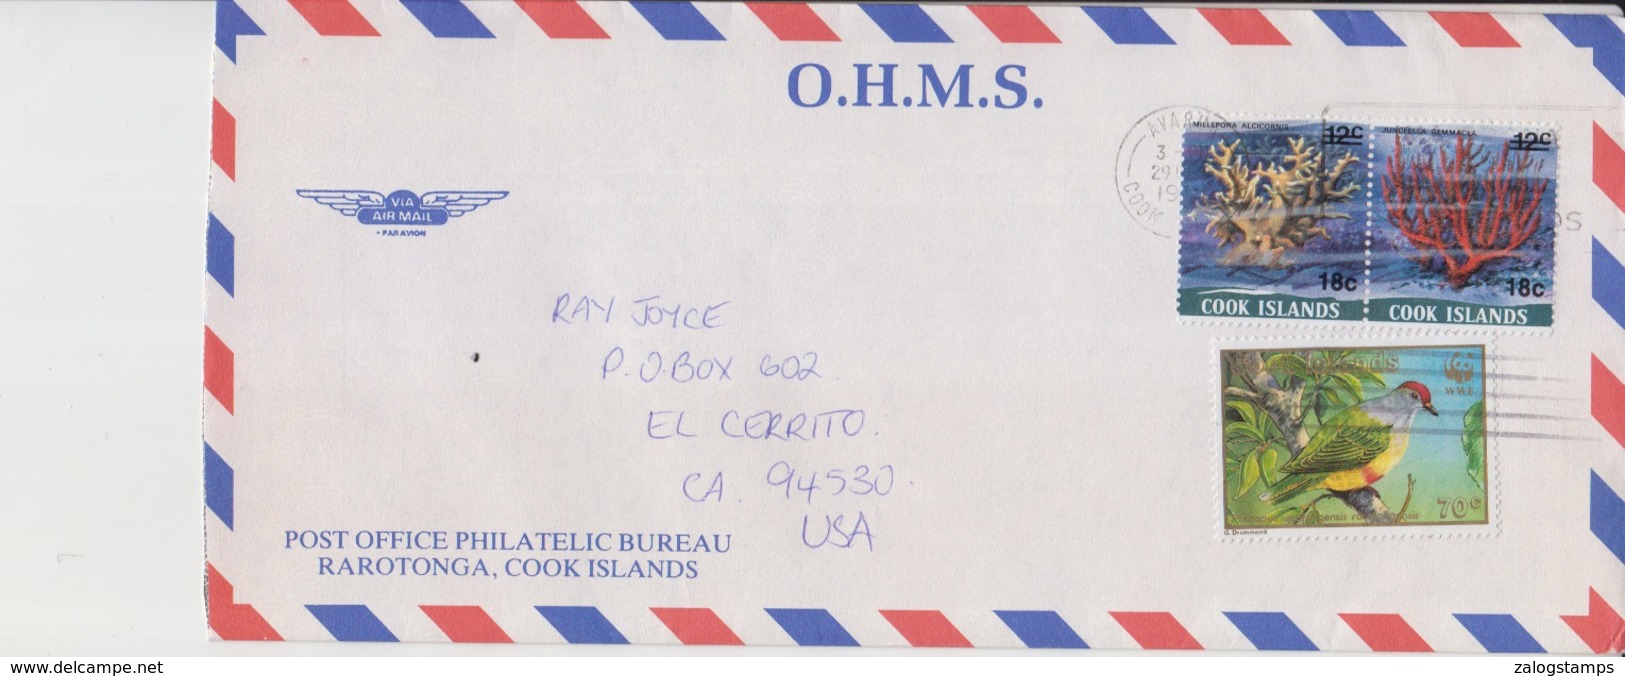 Cook Island Official Mail Cover   (A-3241) - Cocos (Keeling) Islands